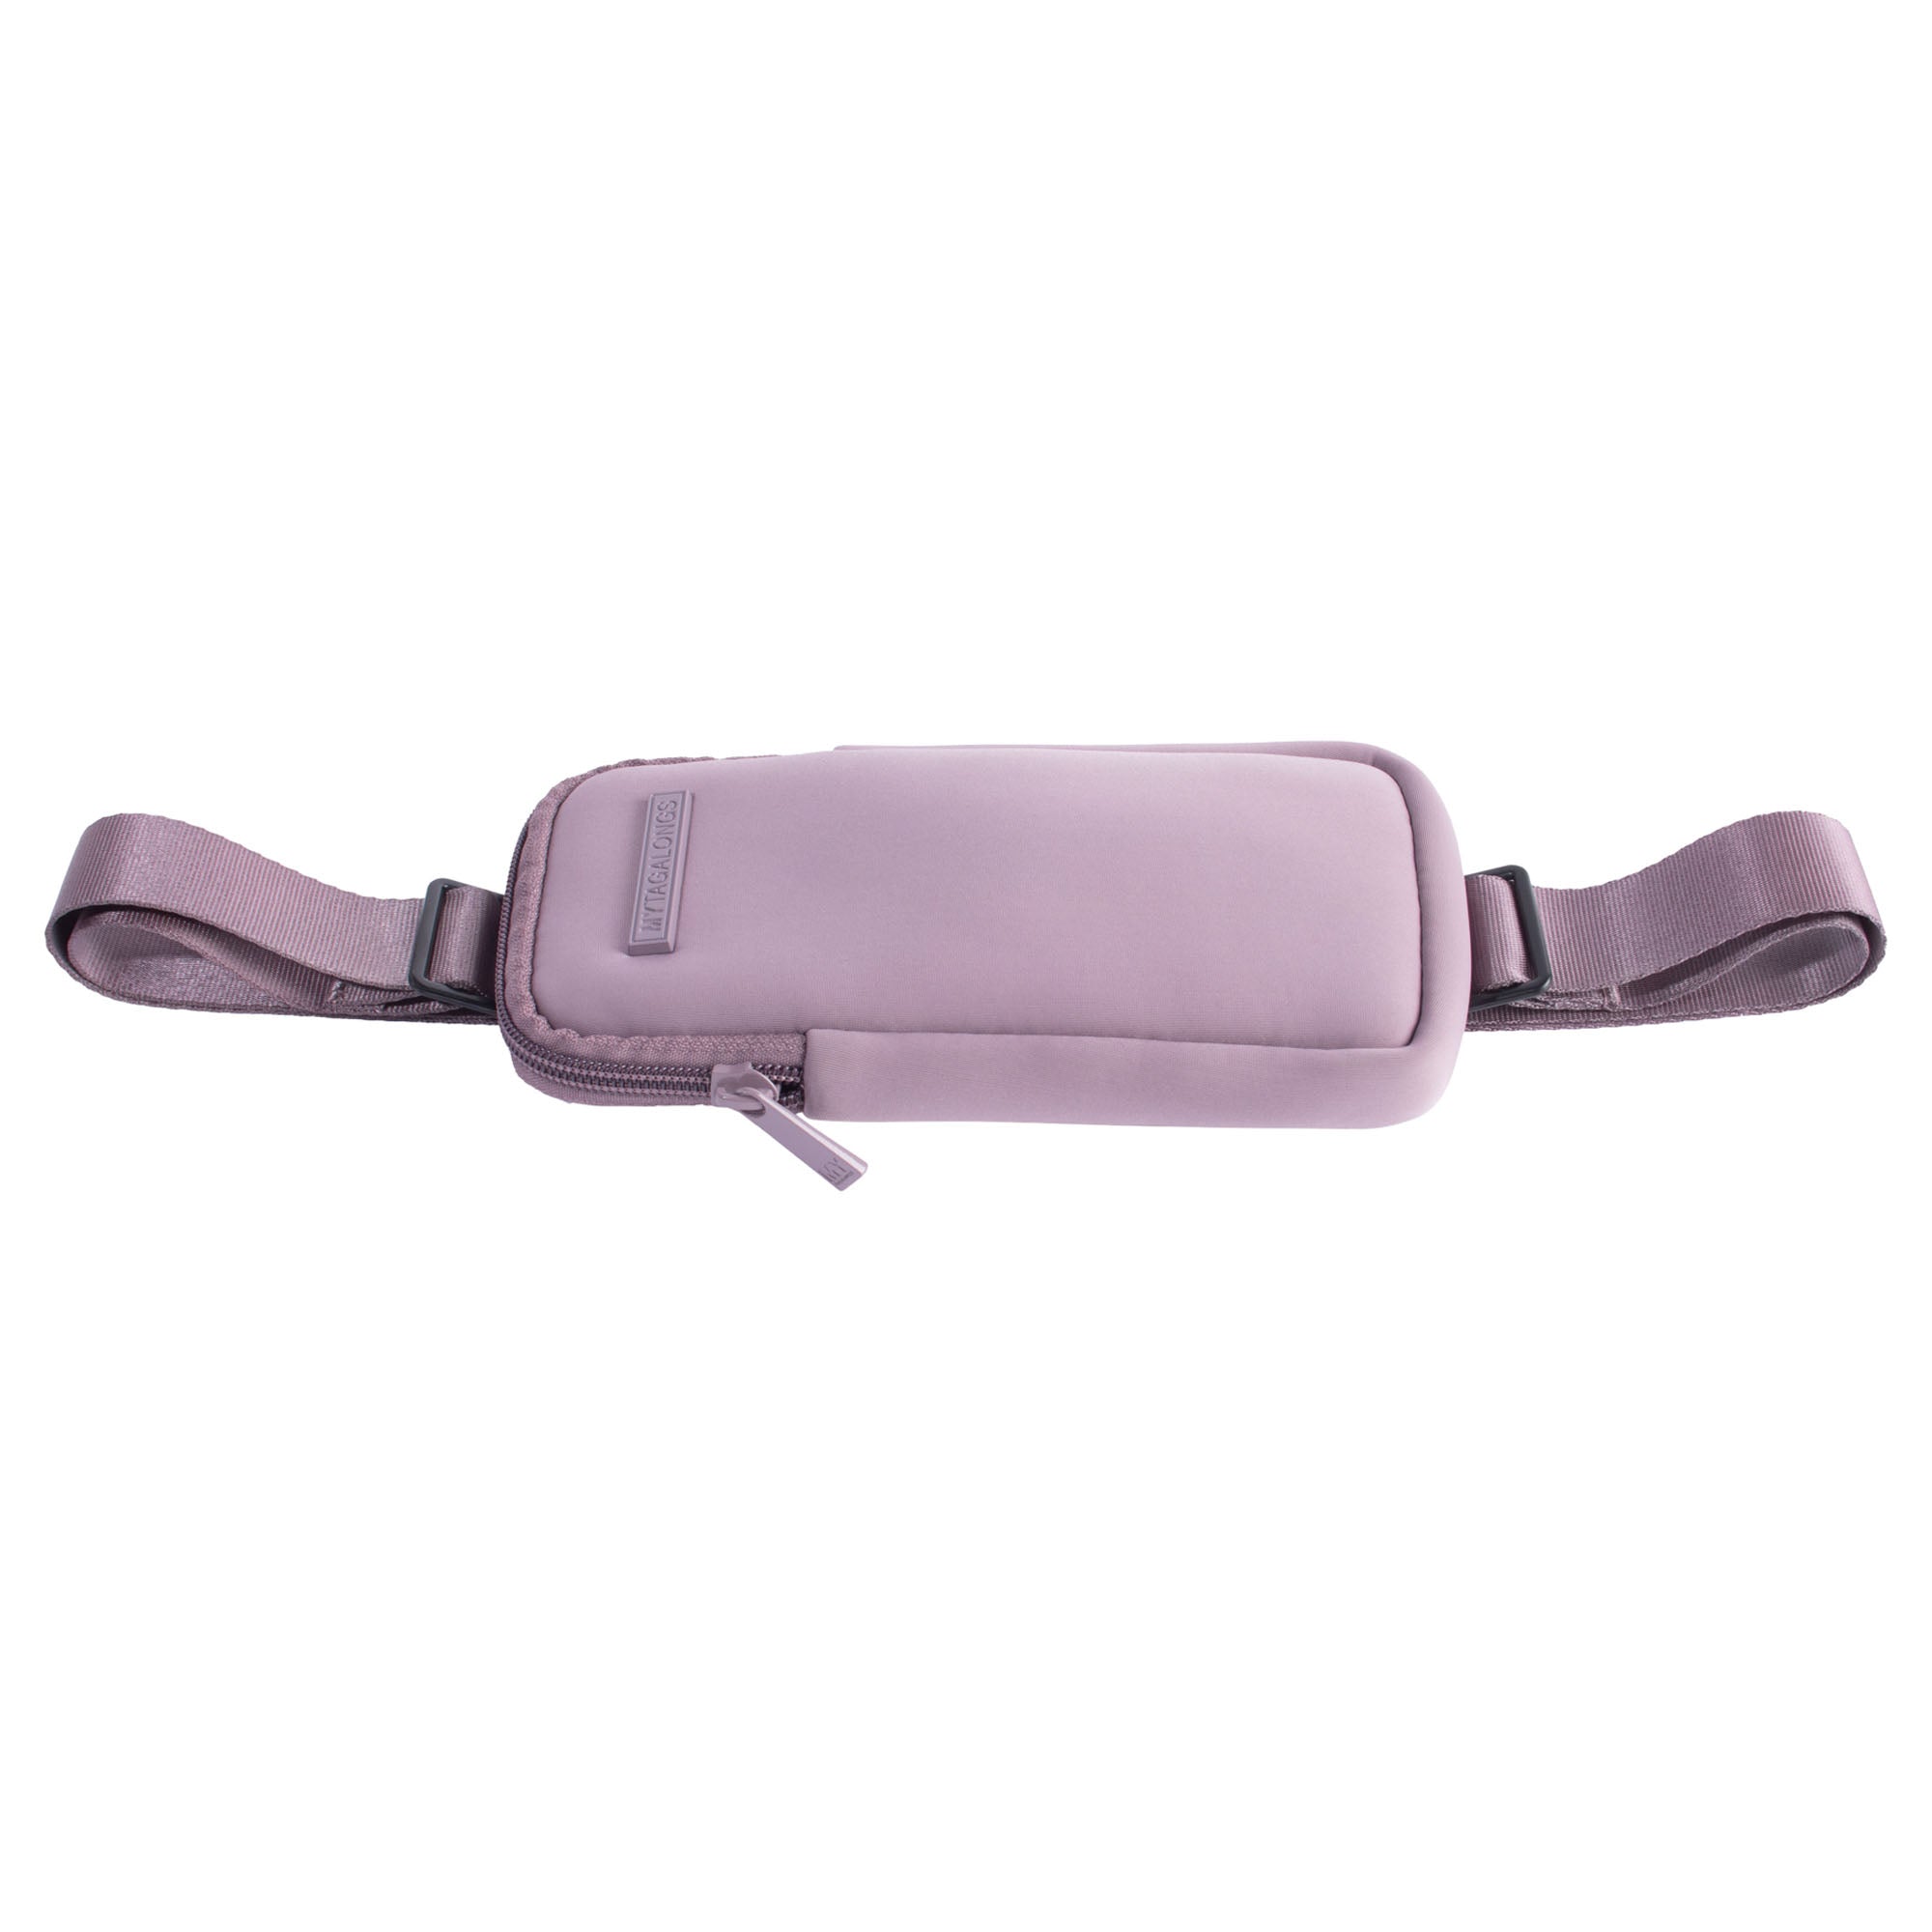 Women’s sling bag, Outdoor products purple sling